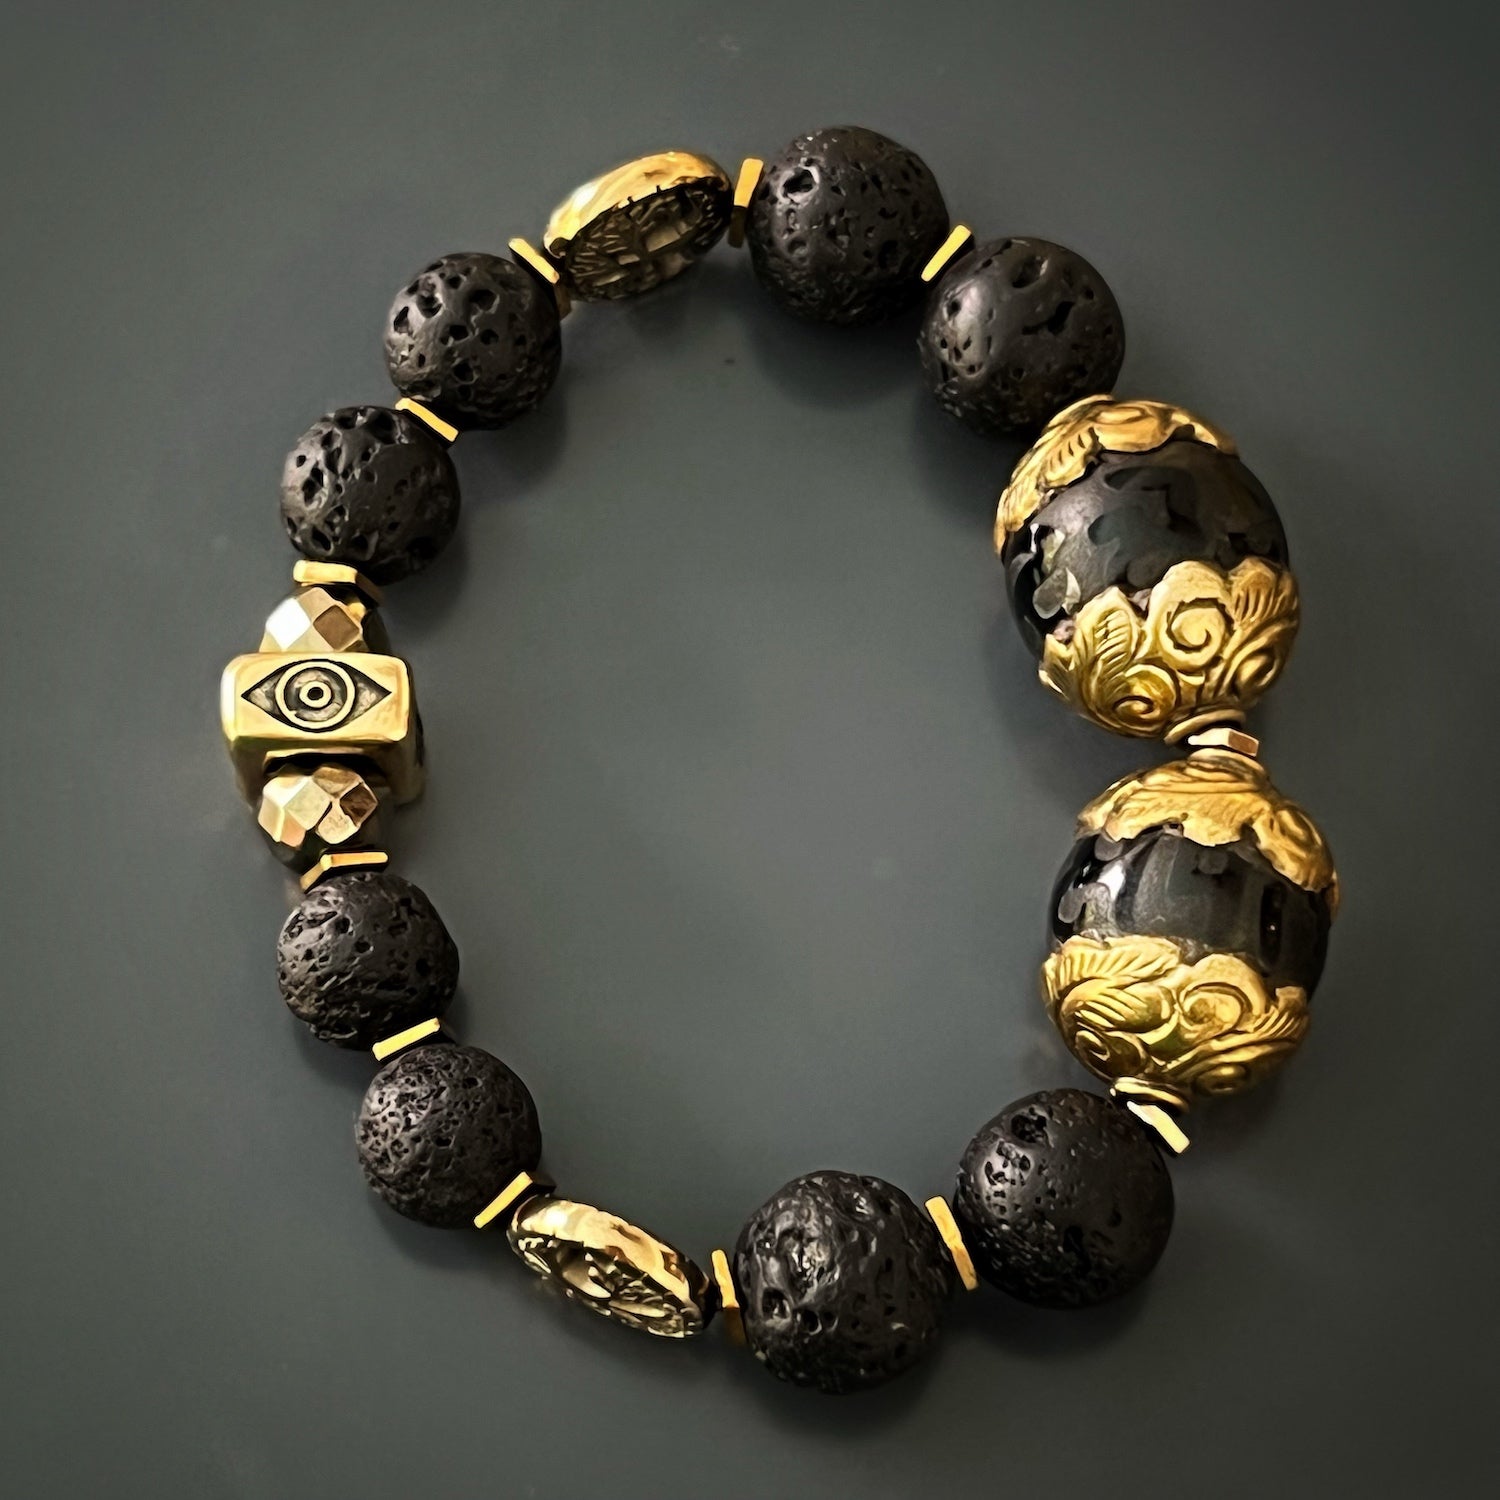 Experience the power of sacred mantras with the handmade Nepal beads in this Black Talisman Bracelet